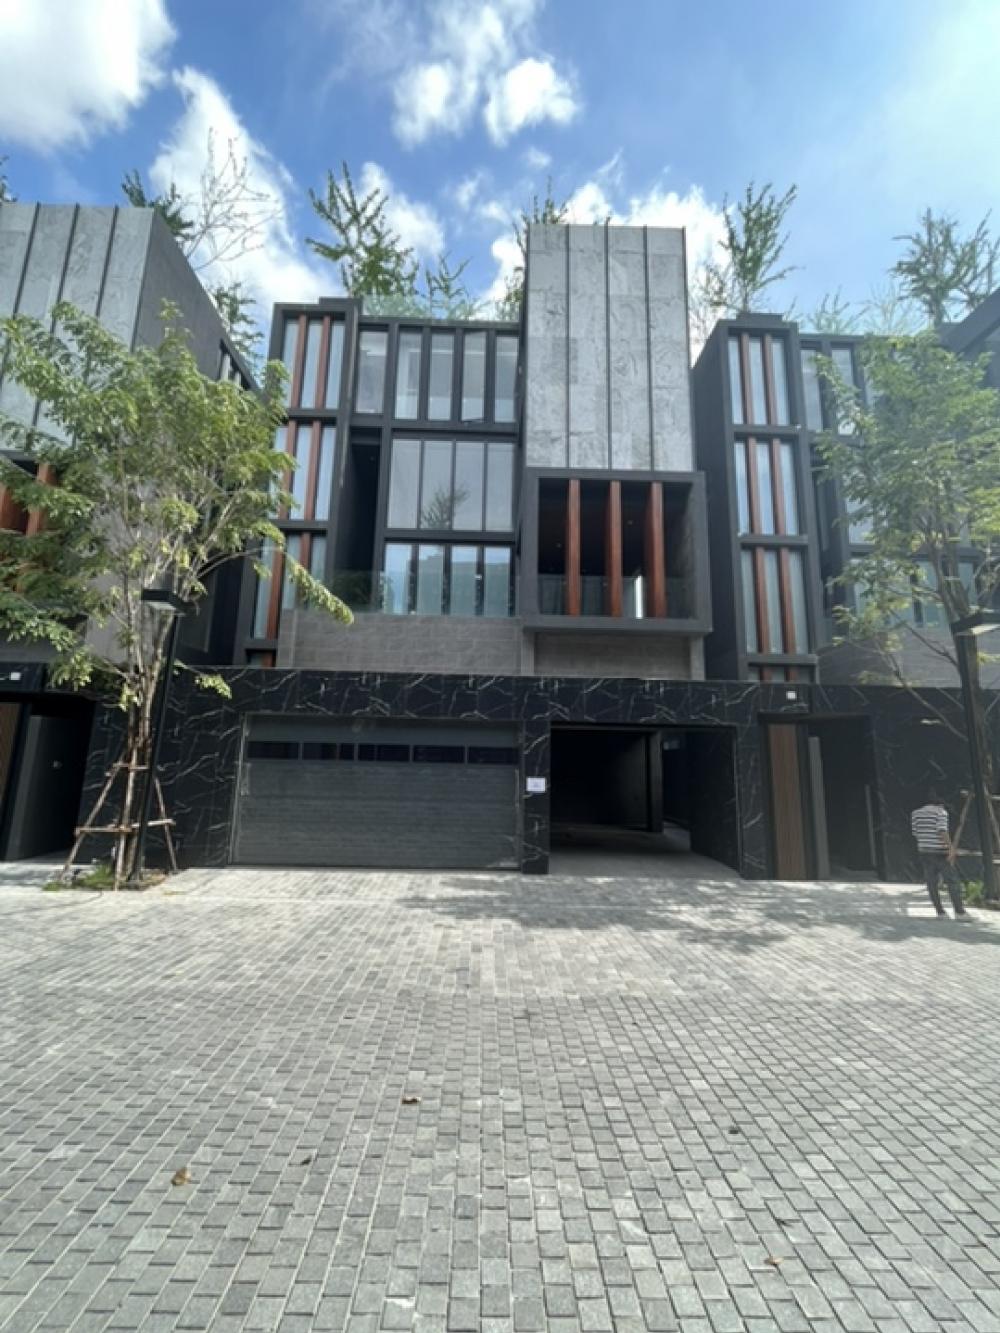 For SaleHouseLadkrabang, Suwannaphum Airport : 📍FOR SALE , Bibury Village Srinakarin (Bibury Village Srinakarin) 🎉⚡️Modern house complete with every convenience, comes with an elevator and swimming pool on the upper floor for privacy. Type A : Sapphire, 4-story detached house (not including rooftop), 